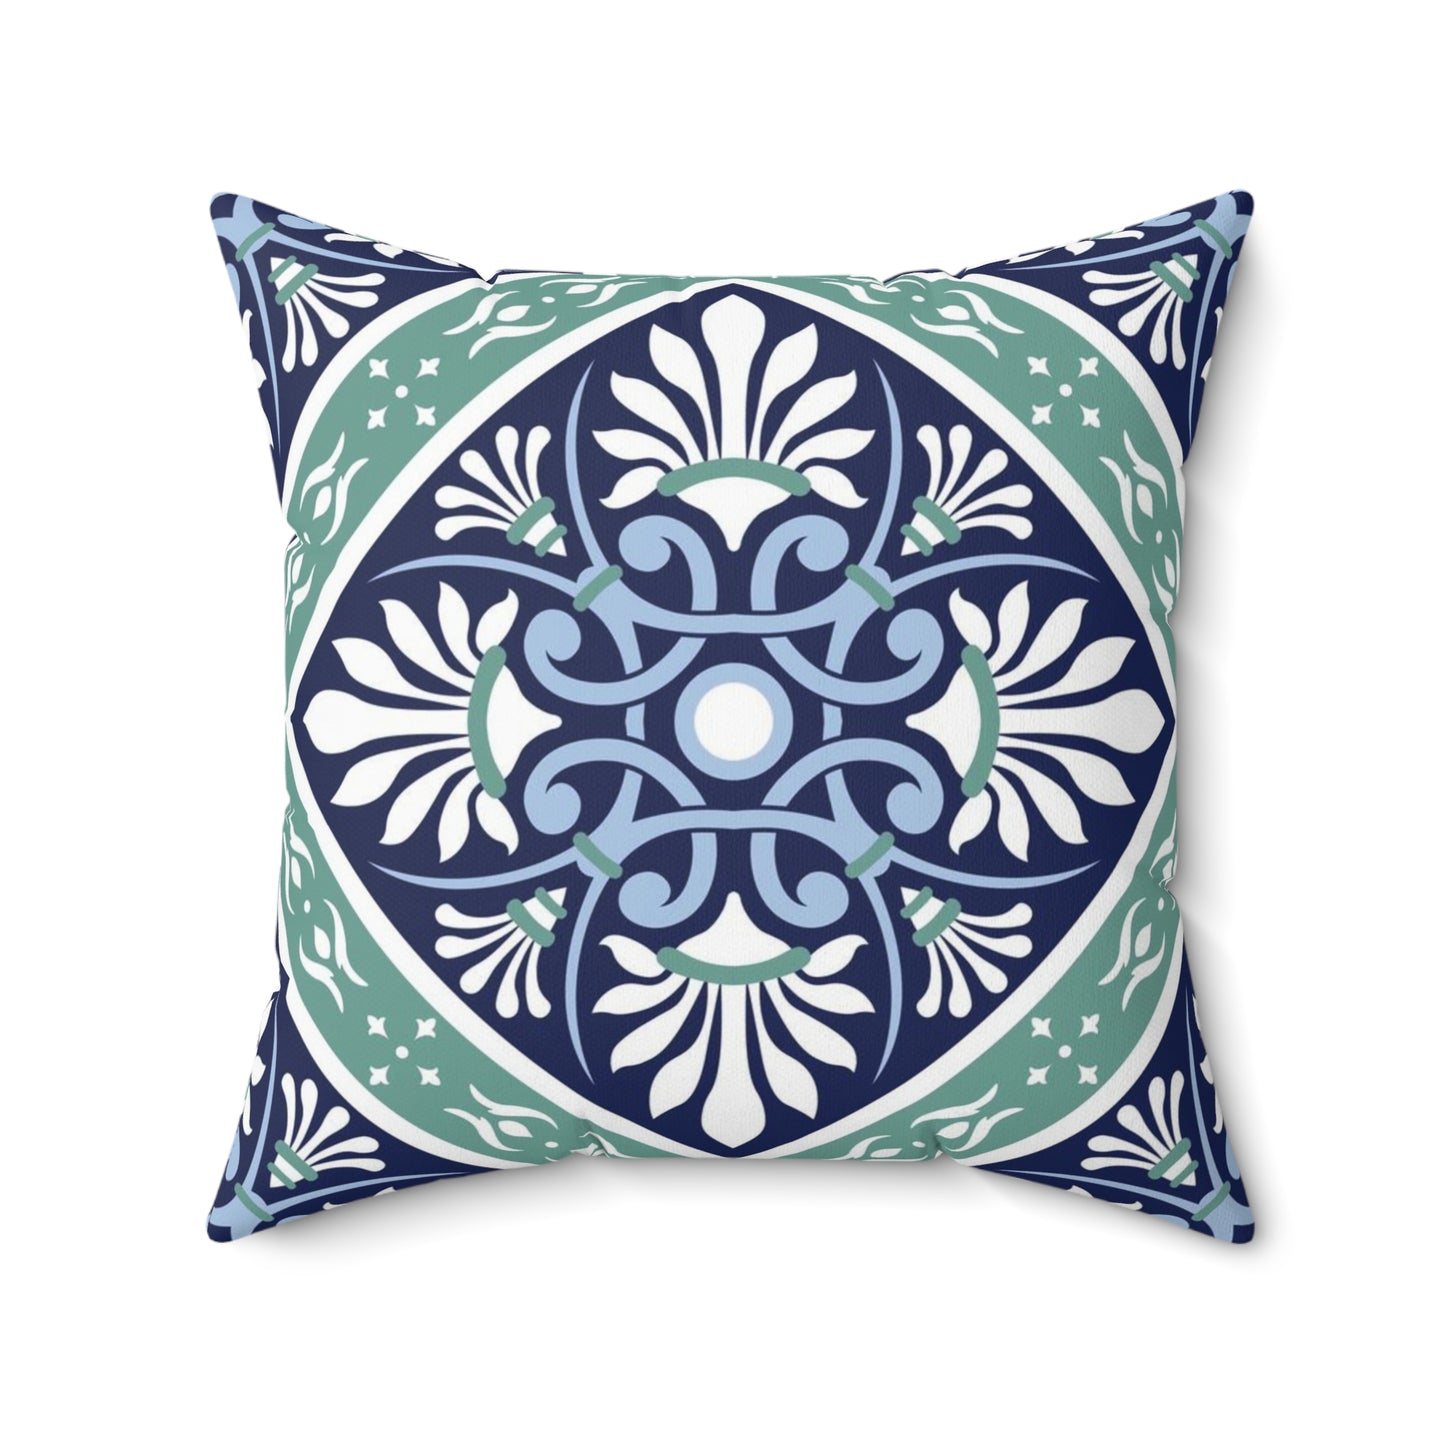 Moroccan Blue and Green Decorative Pillow Cover